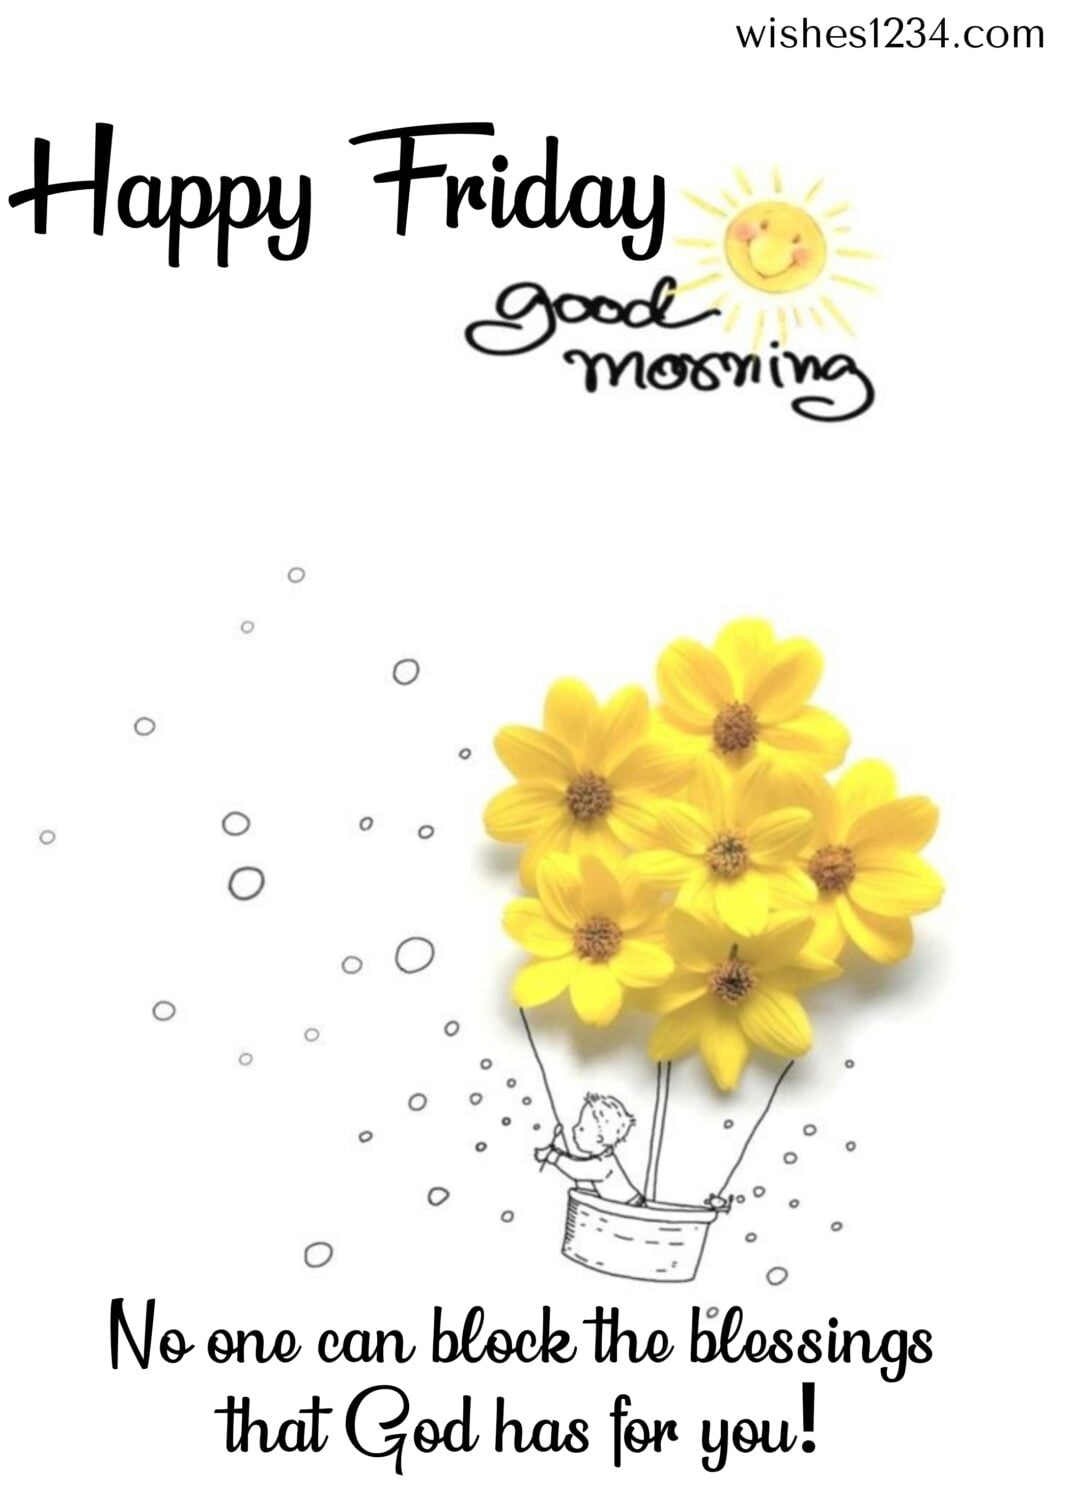 6 Yellow daisy flowers, Quotes about Friday | Friday blessings.